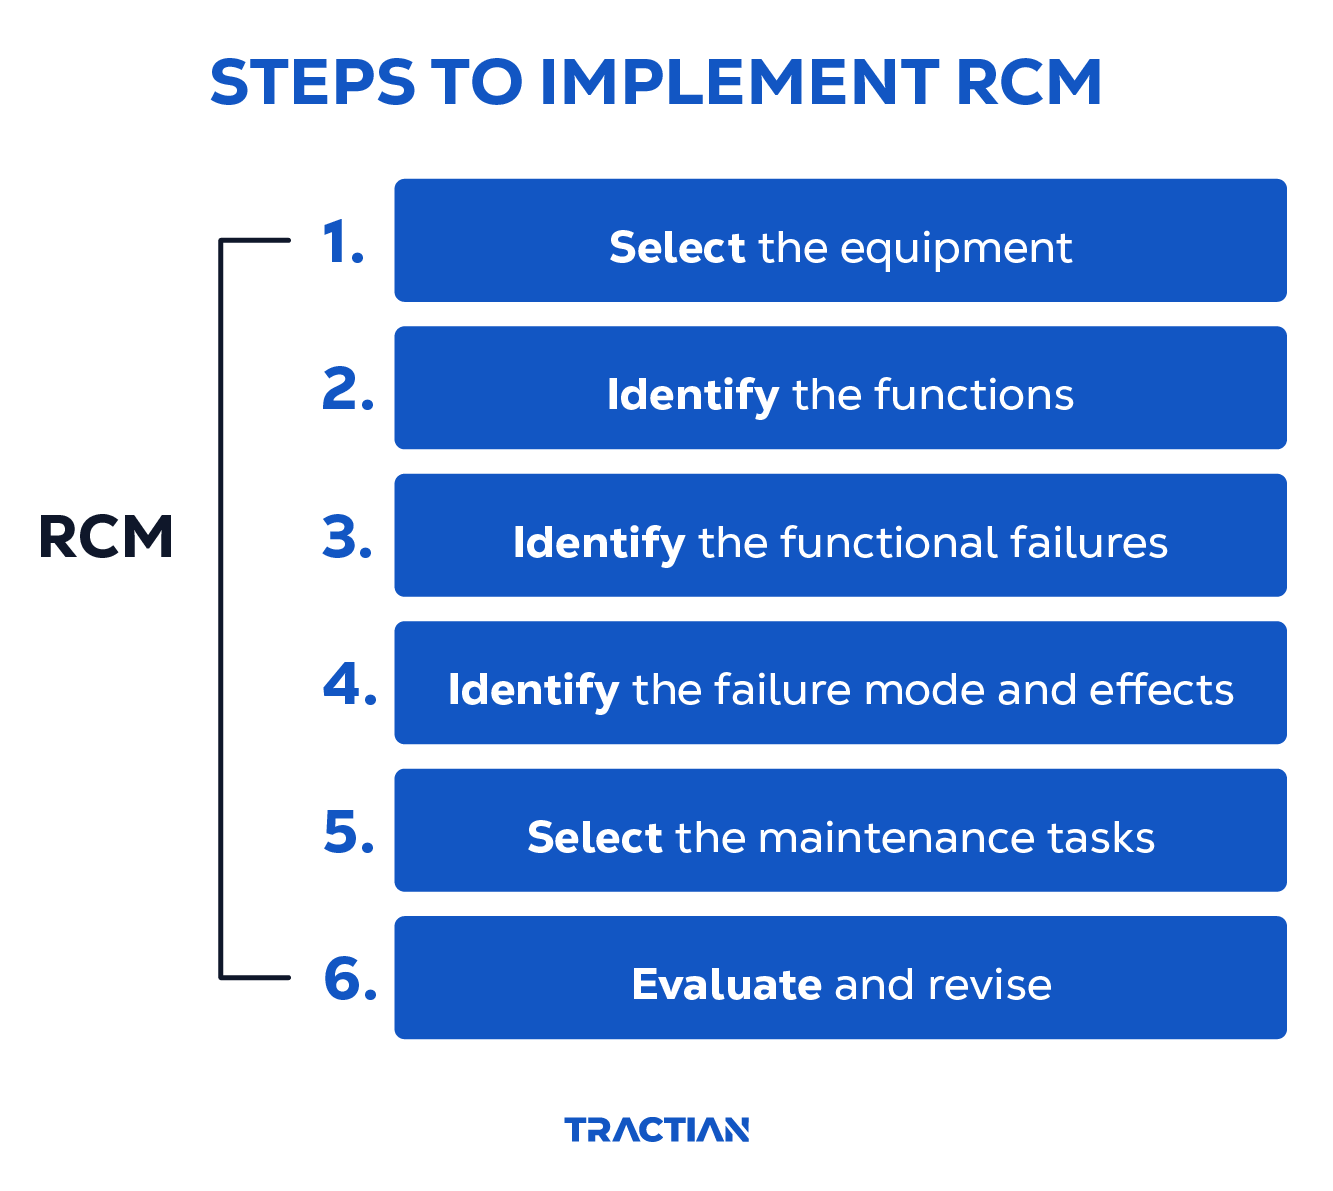 A picture listing the 6 steps to implement RCM